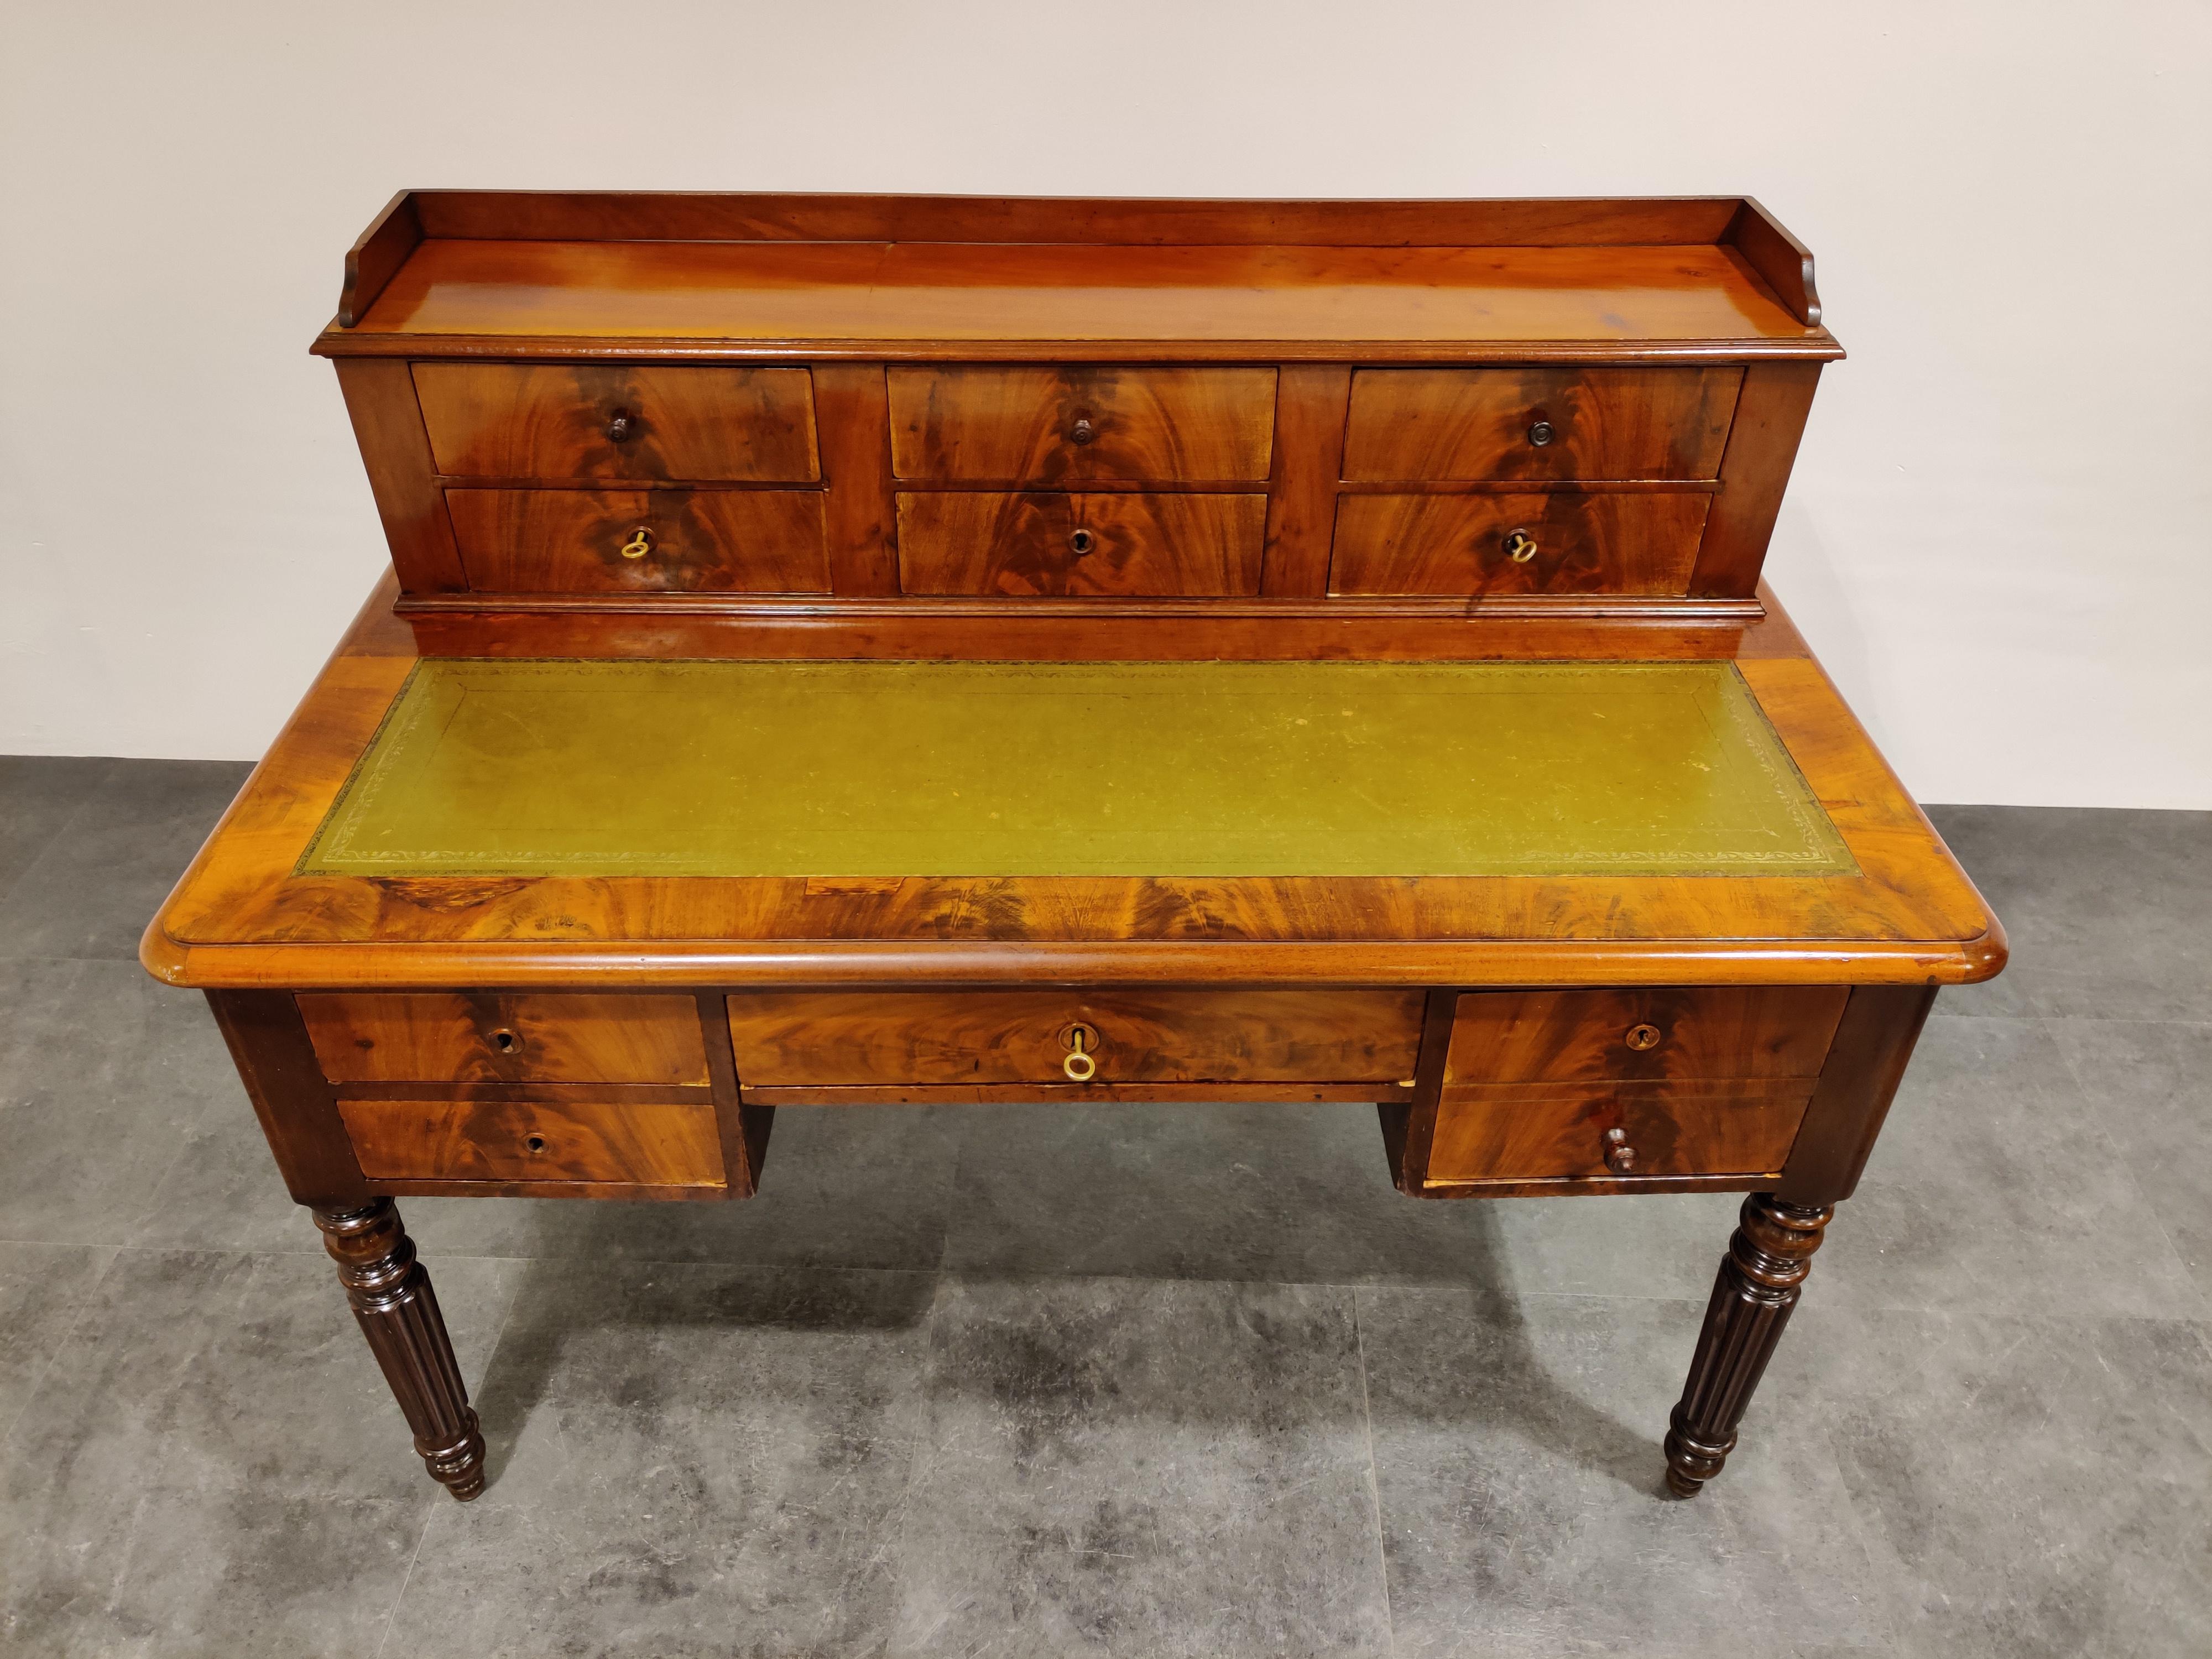 Elegant antique writing desk made from walnut wood and with a faux leather.

Very practical because of the many storage spaces and the deep drawers.

Beautiful veined wood.

Comes with working locks and keys.

Good condition, some minor age